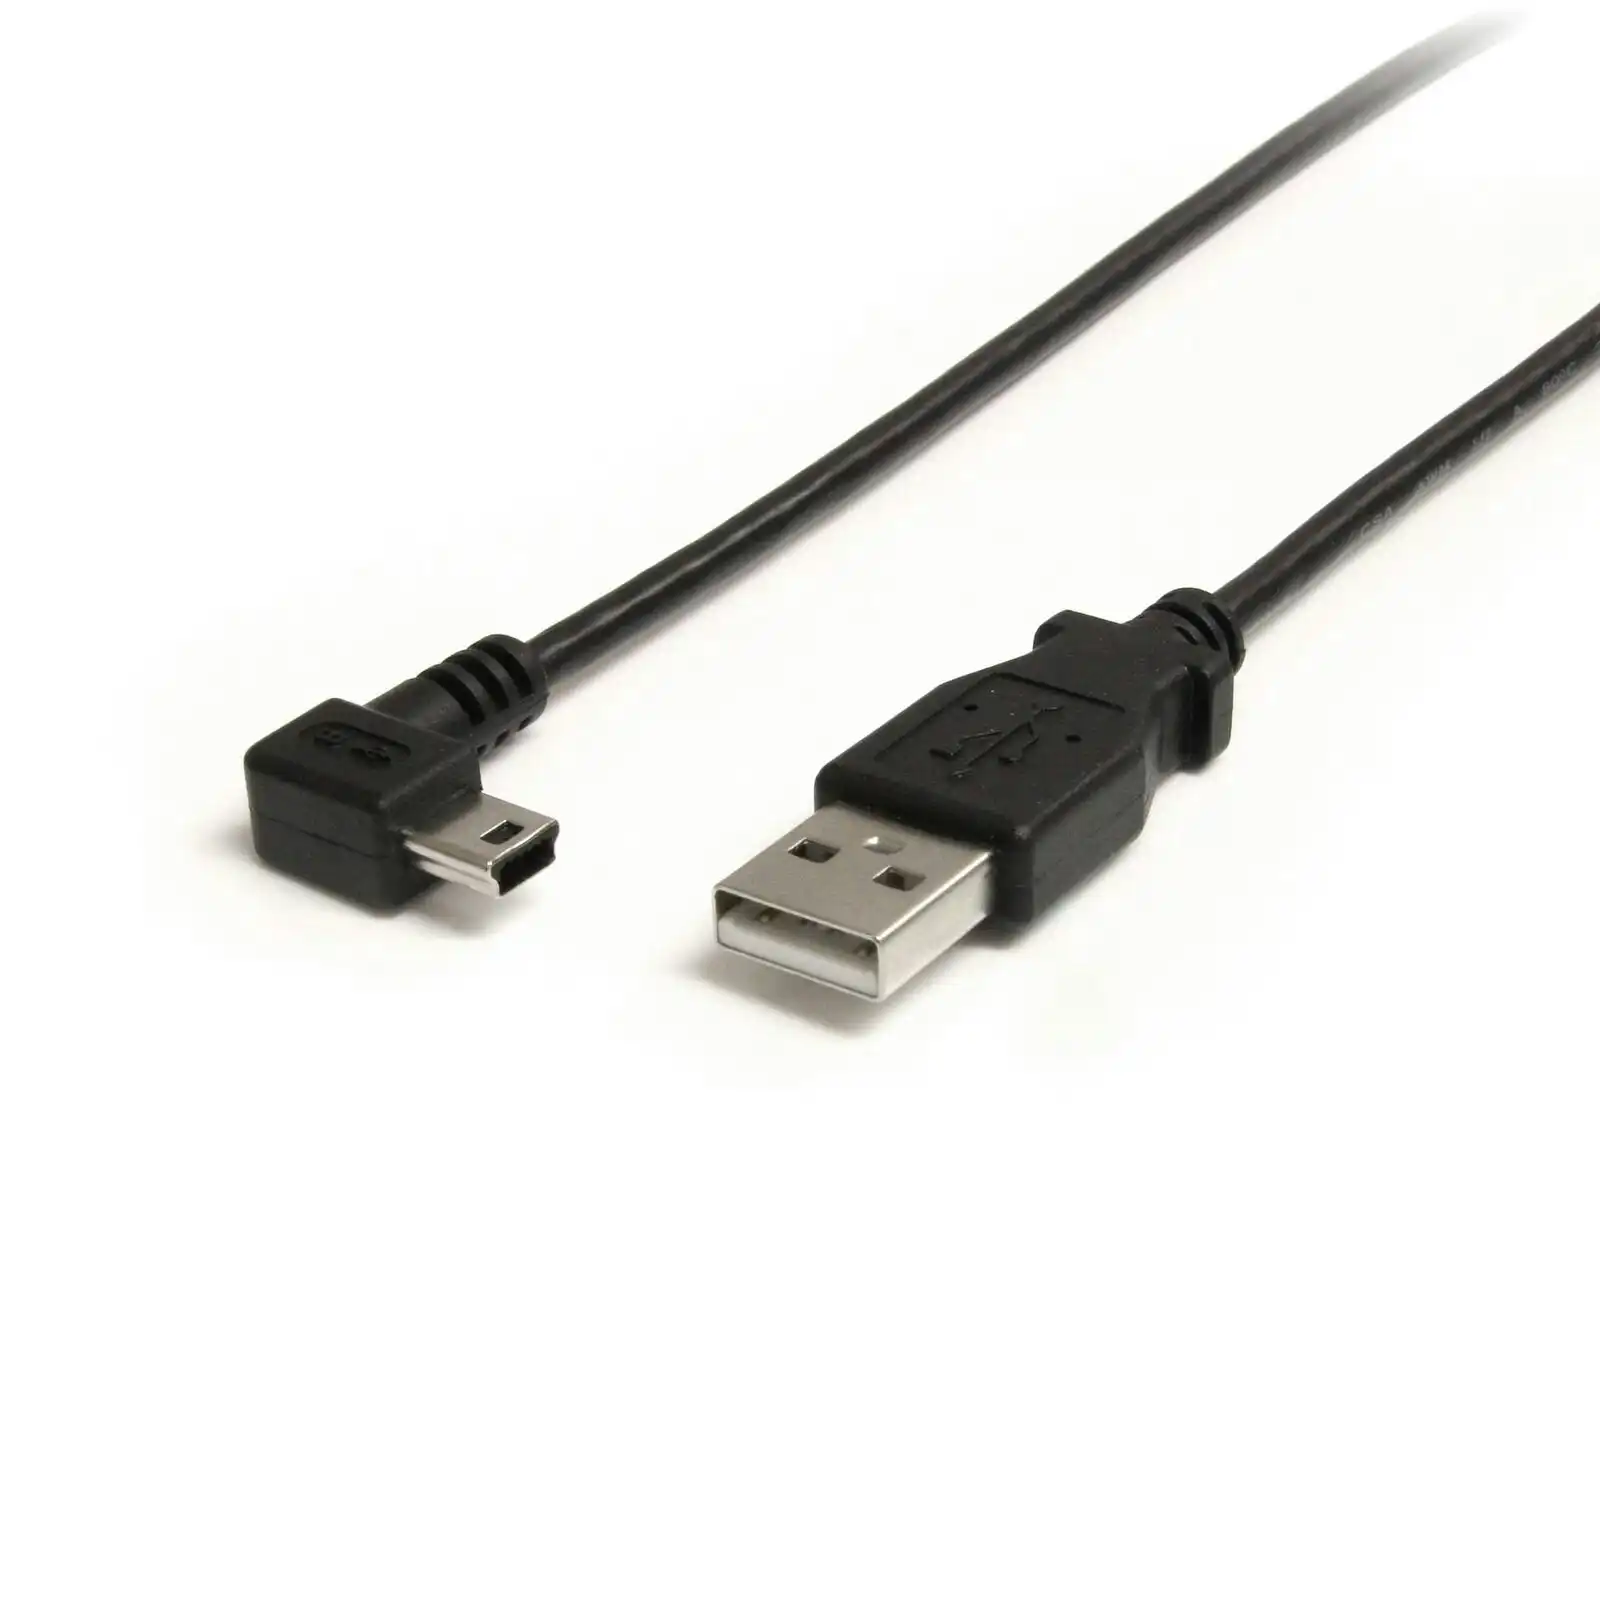 Star Tech 182cm Mini USB Sync/Charging Cable Right Angled - For Mobile Devices